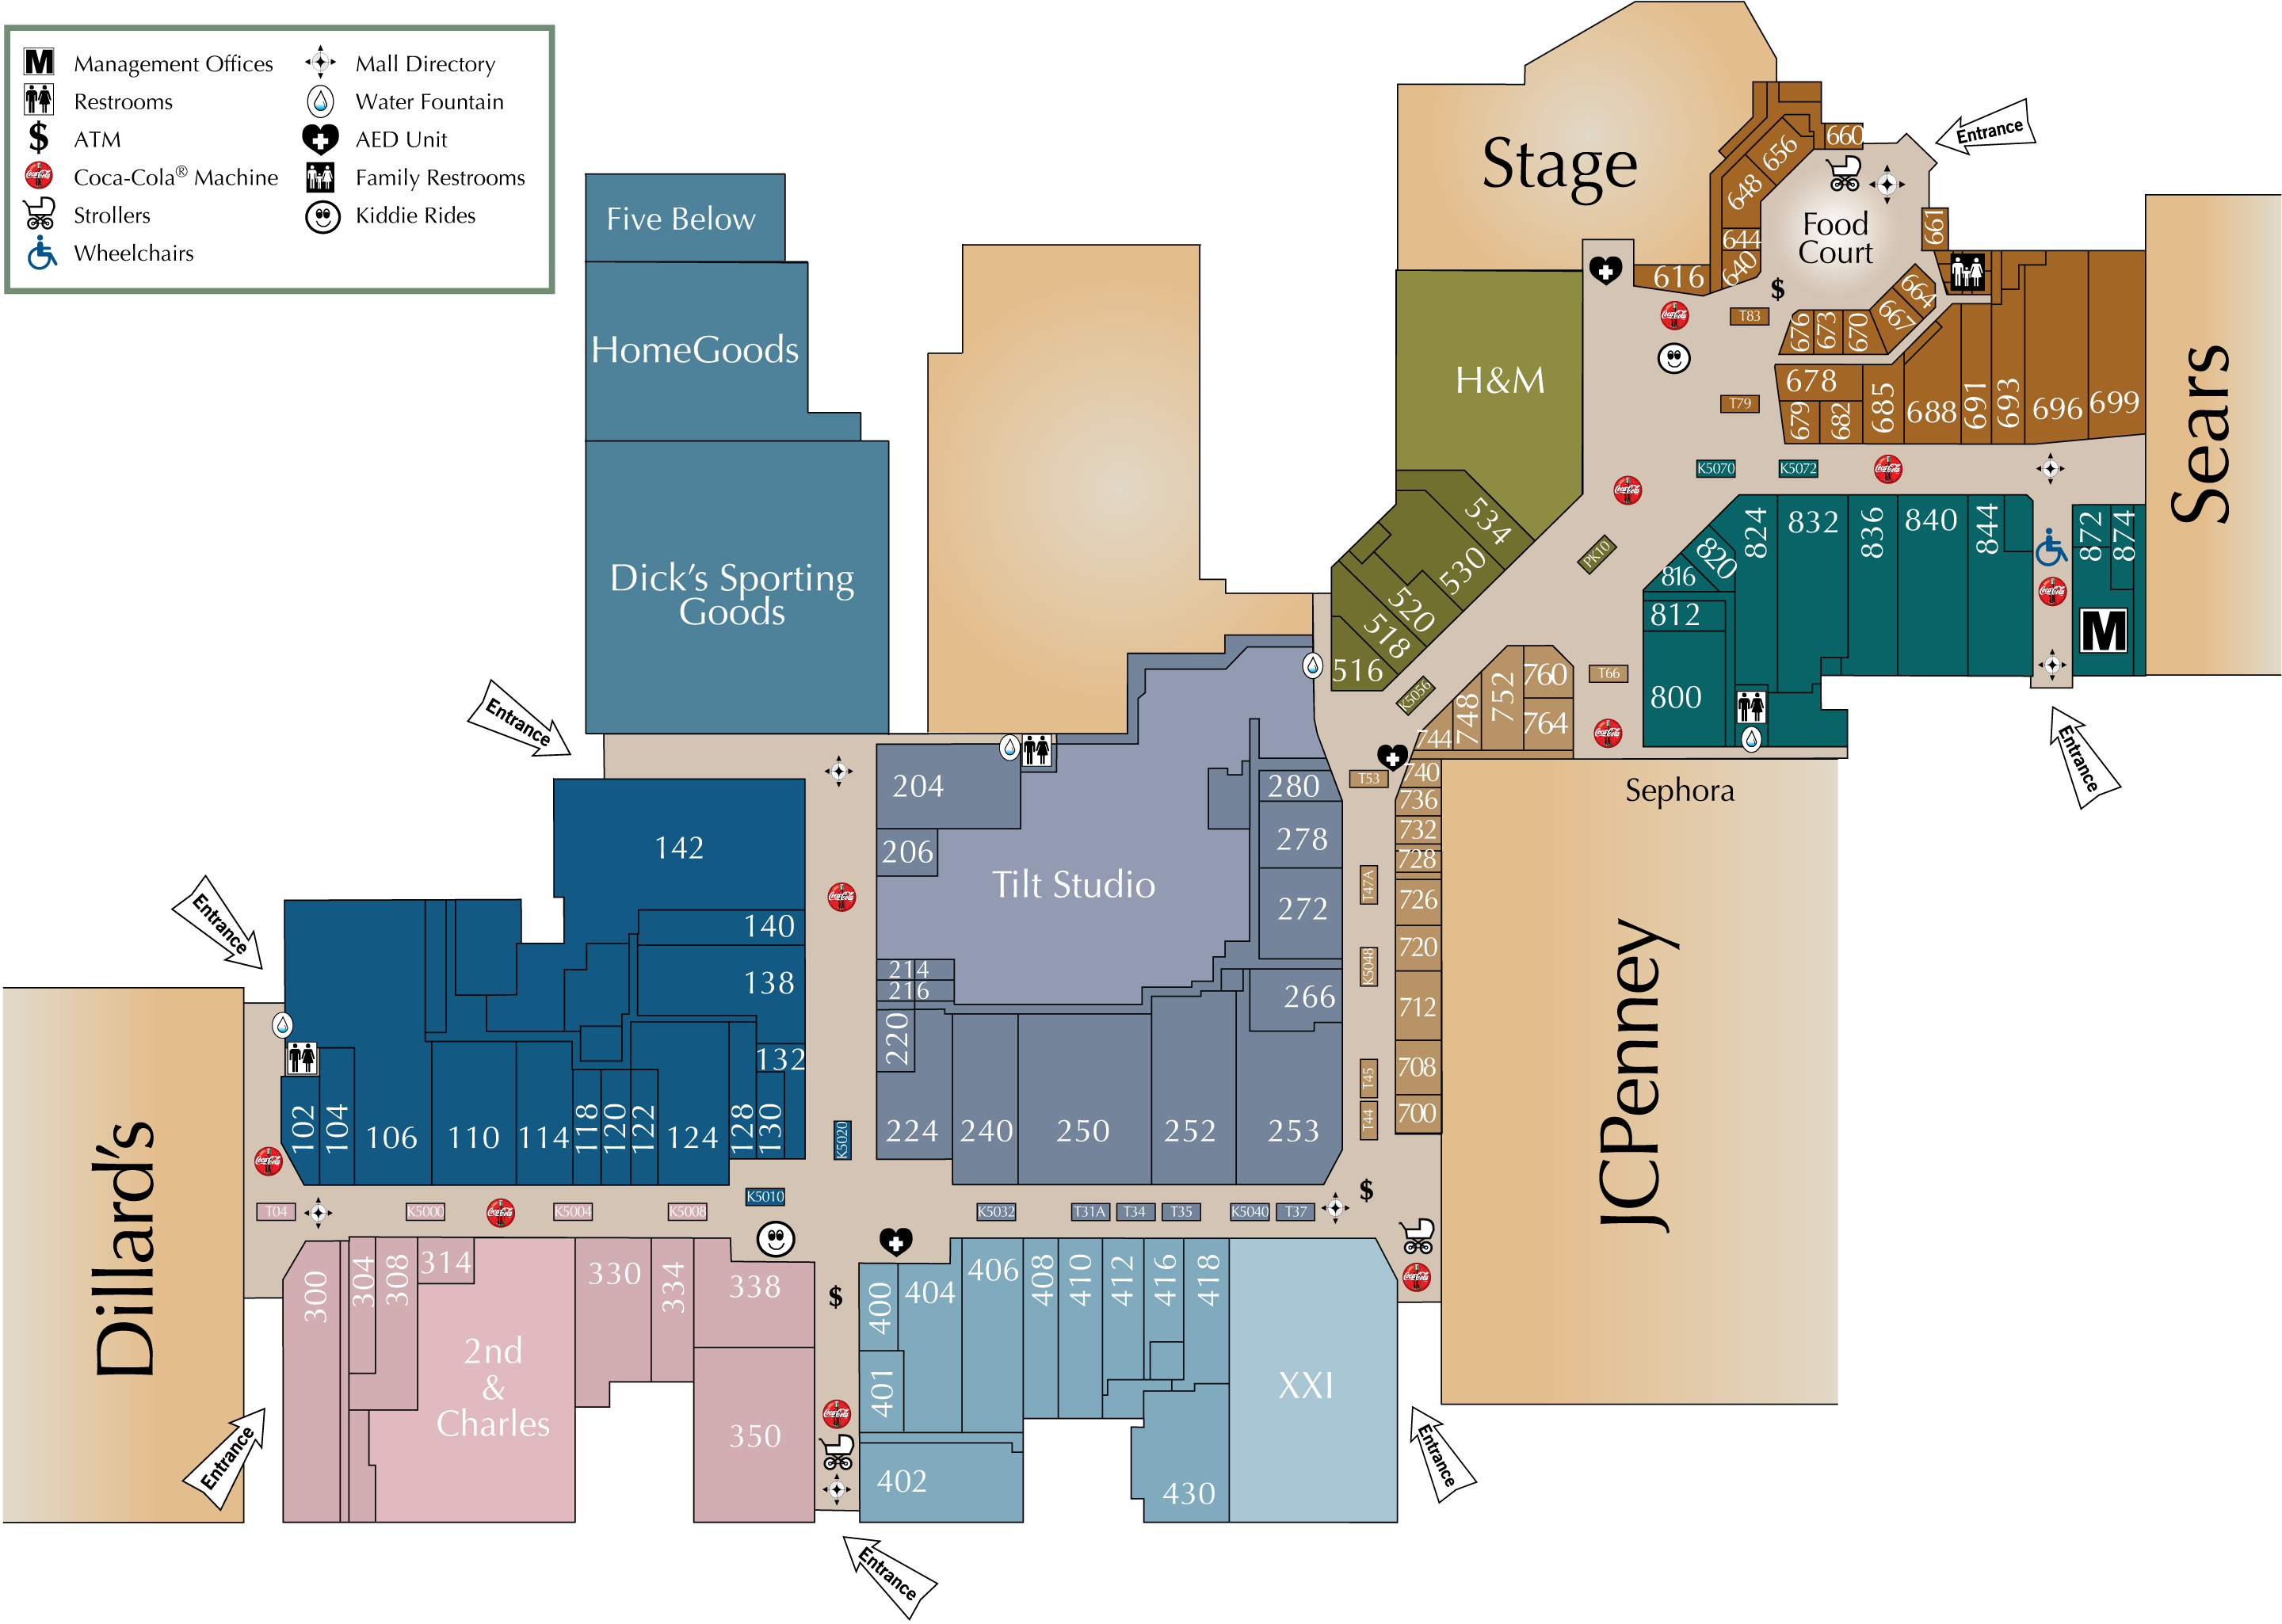 Park Meadows Mall Directory Map